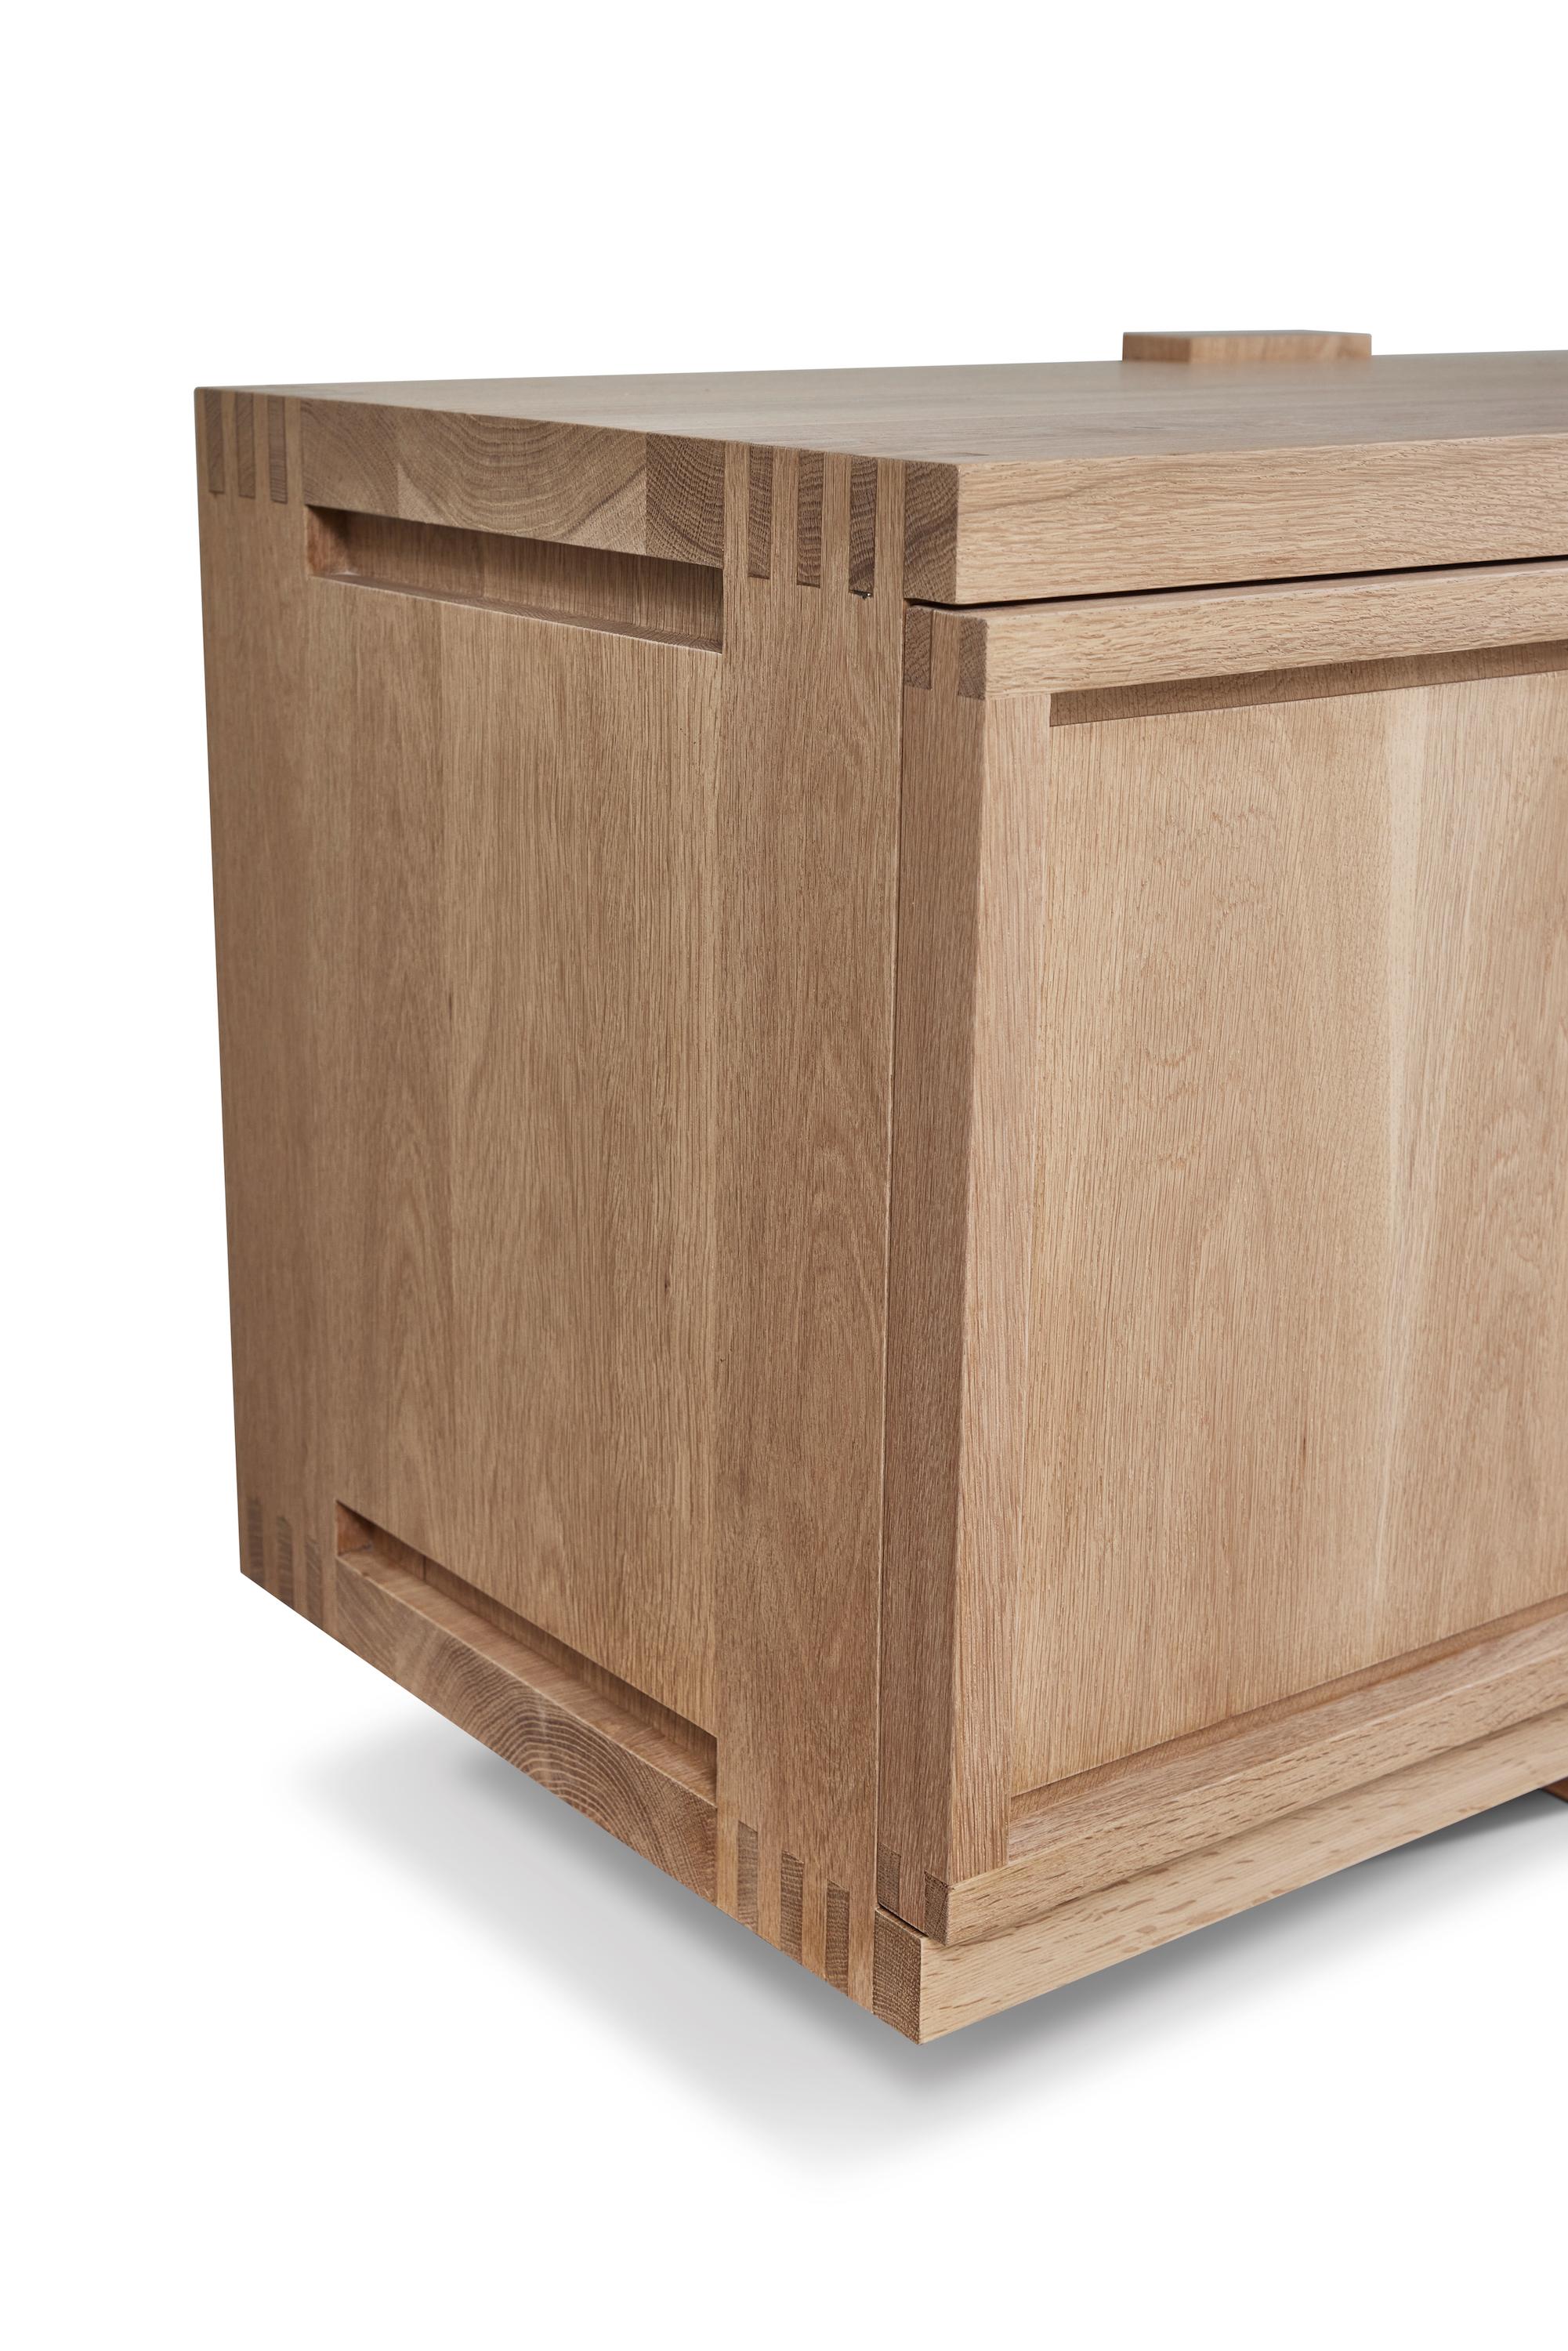 Joinery Lake Credenza, in White Oak, by August Abode For Sale